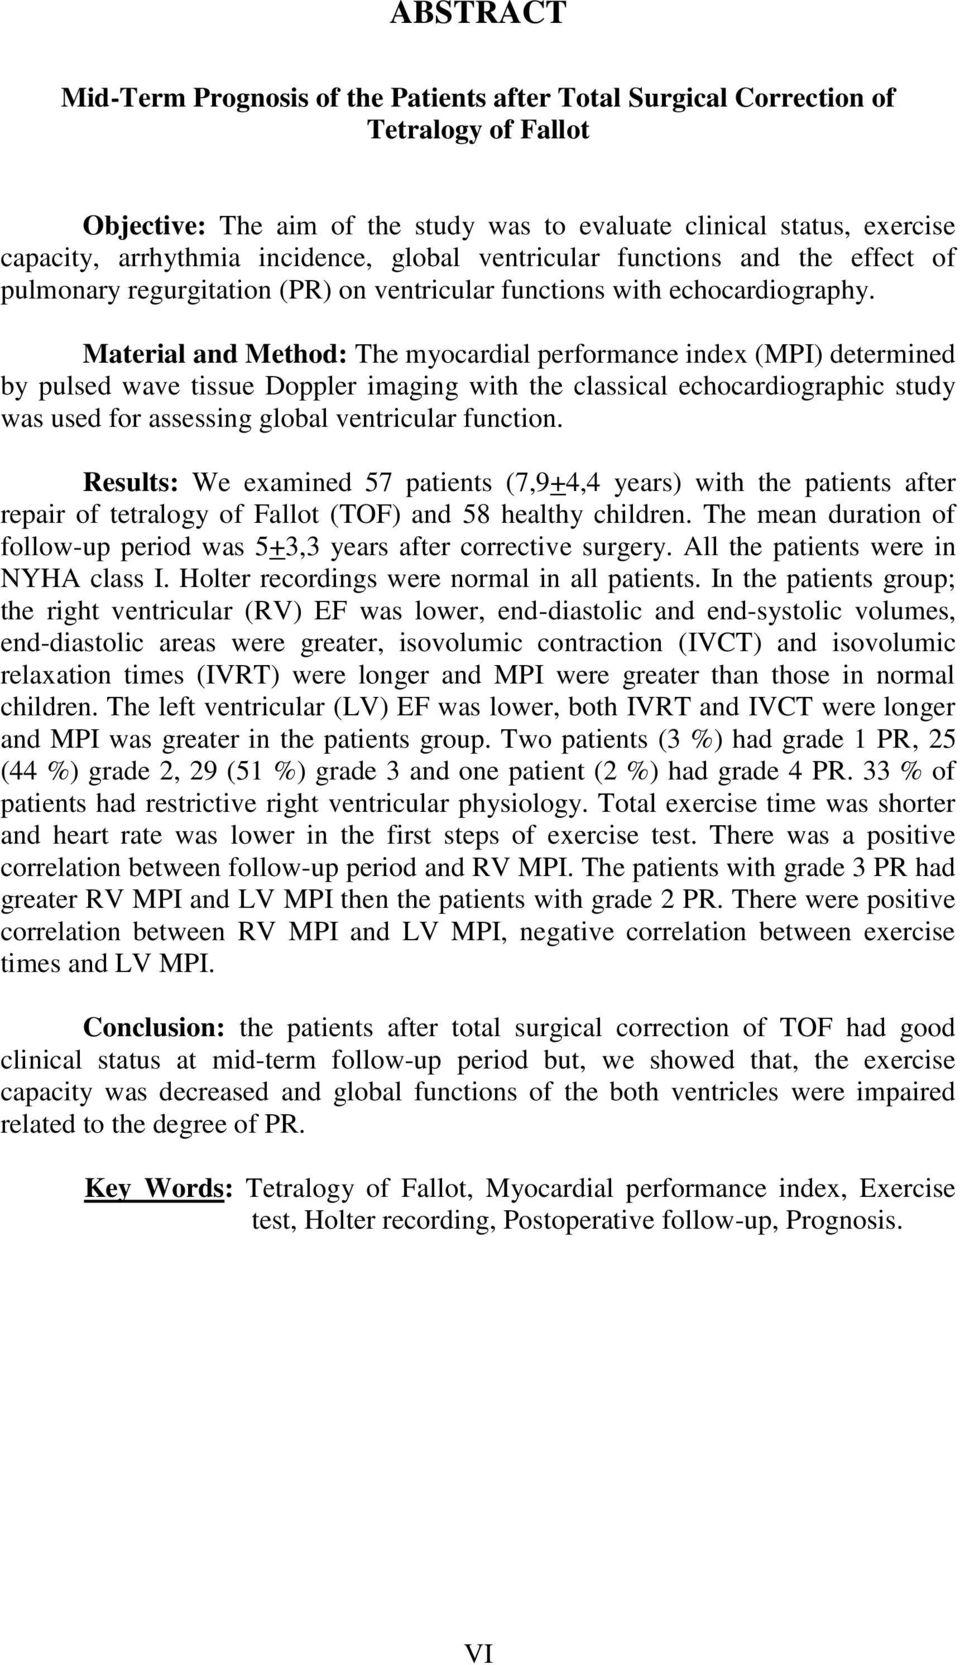 Material and Method: The myocardial performance index (MPI) determined by pulsed wave tissue Doppler imaging with the classical echocardiographic study was used for assessing global ventricular